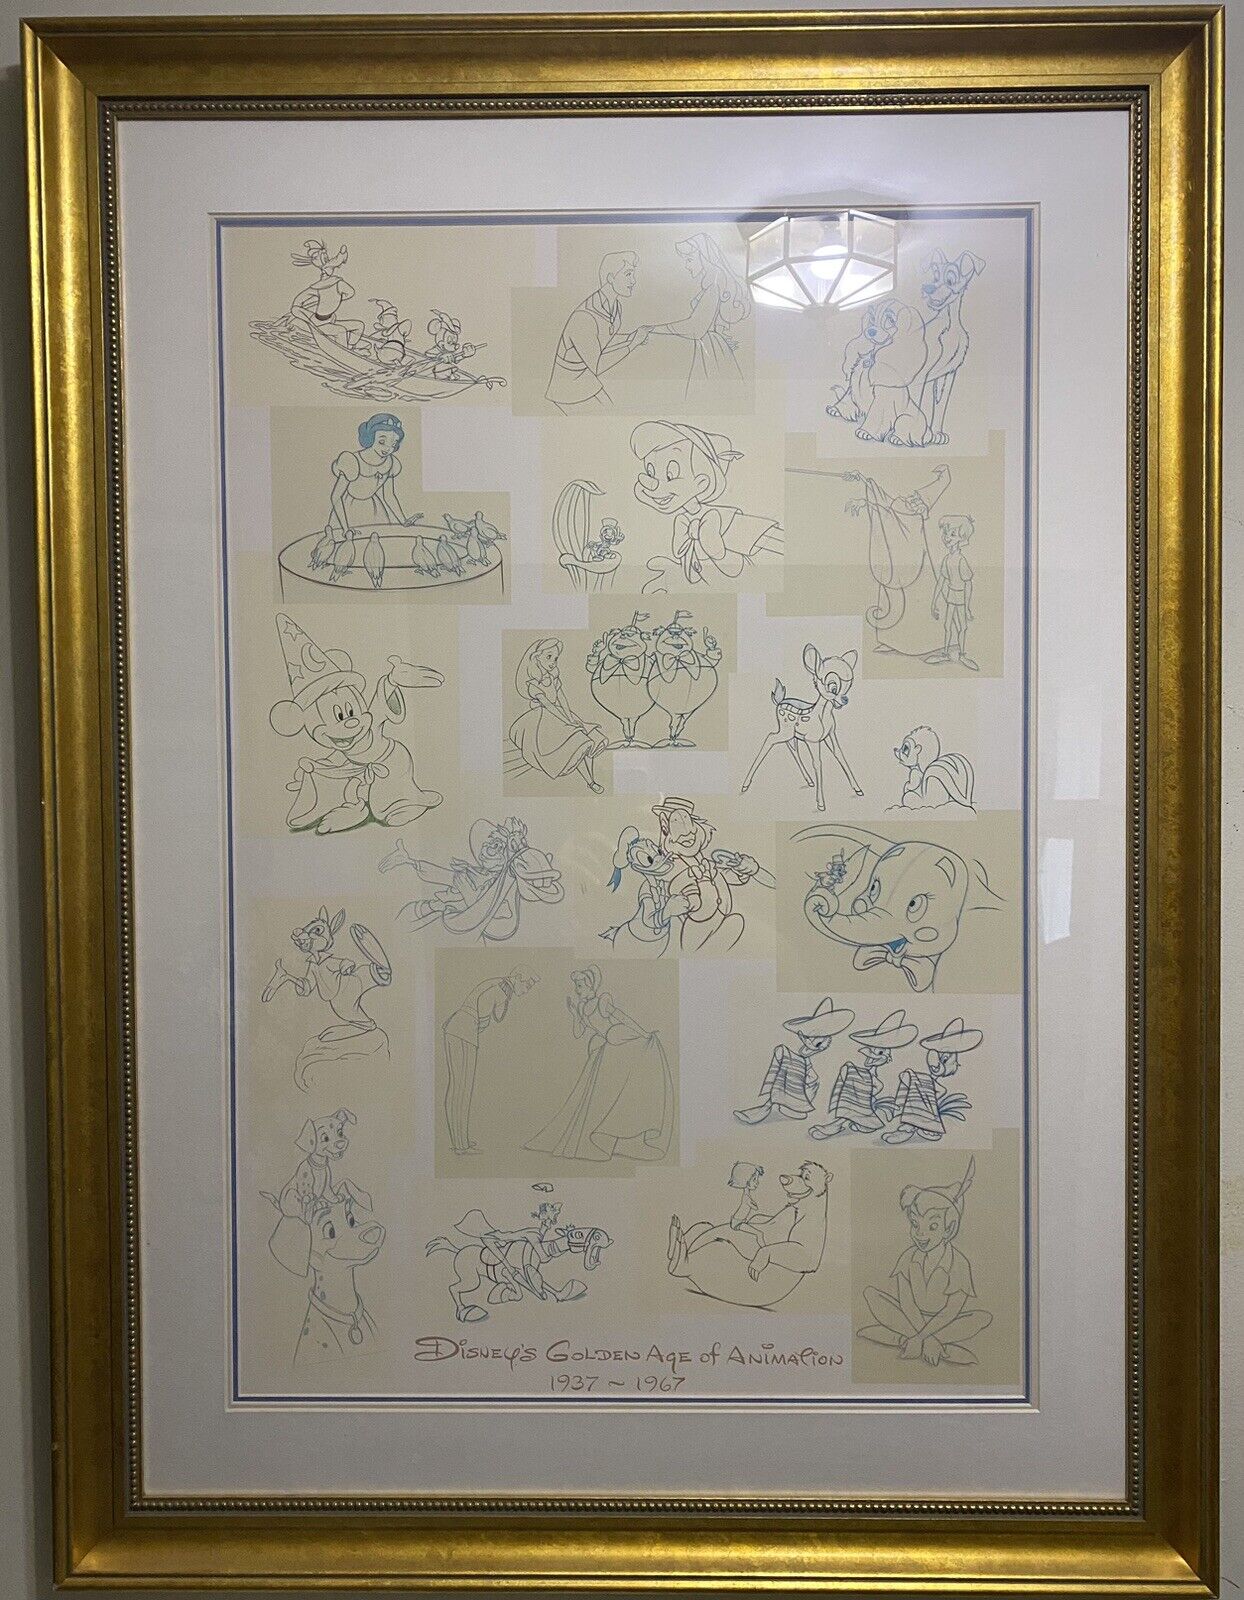 Disney’s Golden Age of Animation Framed Matted Print 1937-1967 Disney Characters